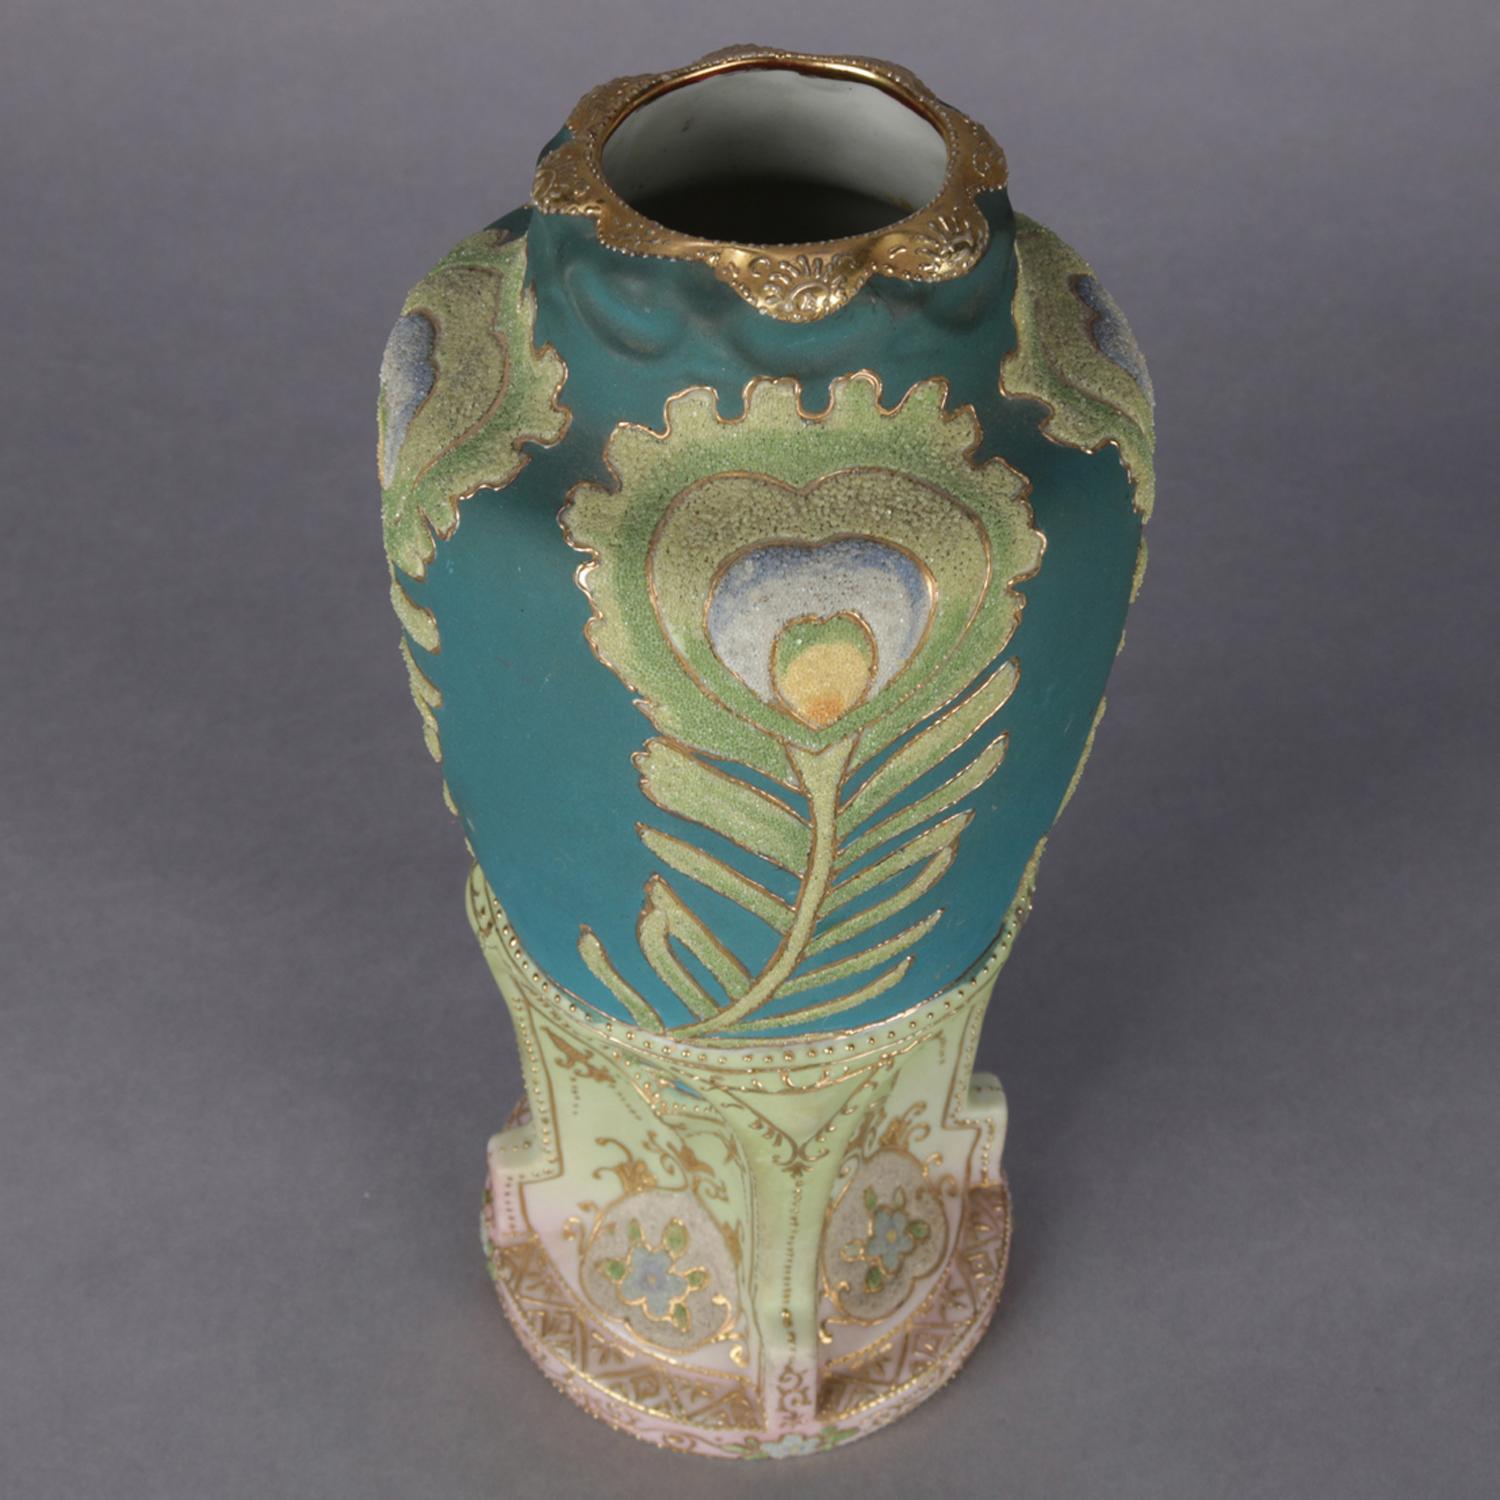 An antique Japanese Art Deco Nippon Coraline decorated vase features double handled urn form with ruffled gilt rim, all-over moriage decorated with stylized peacock feathers, buttress form base and heavy gilt beading and highlights, marked on base,